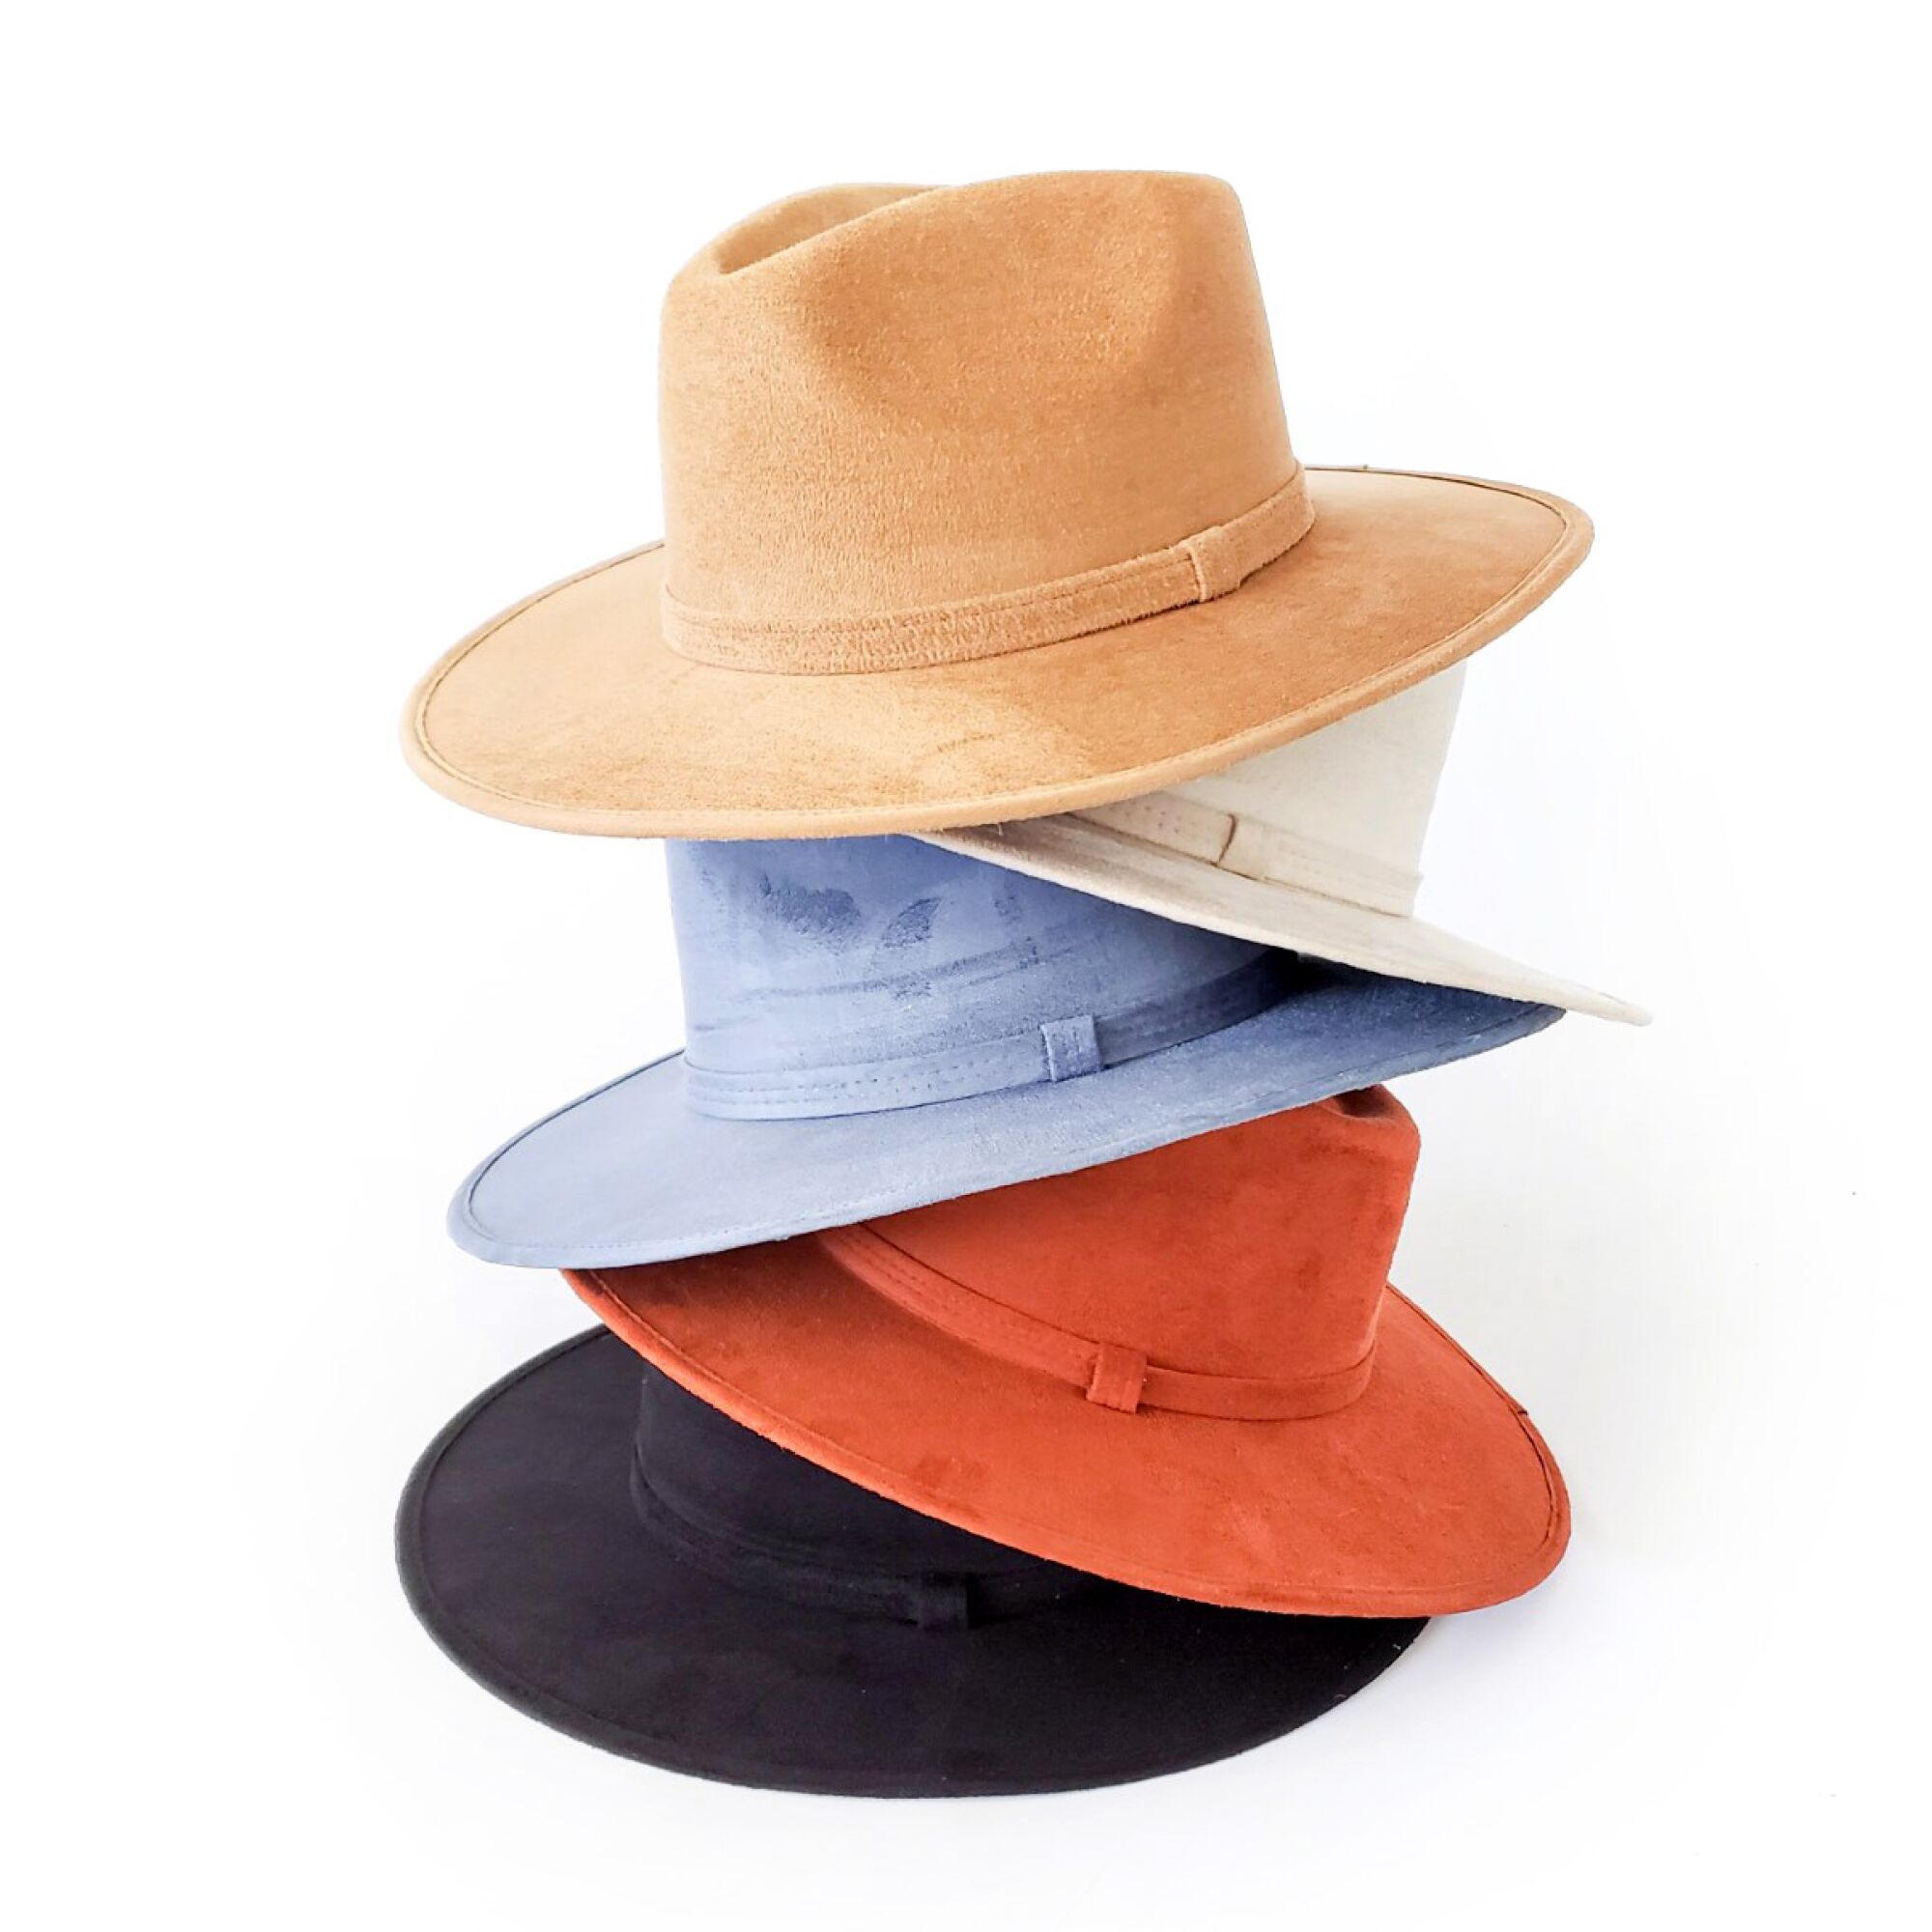 Several stacked hats.